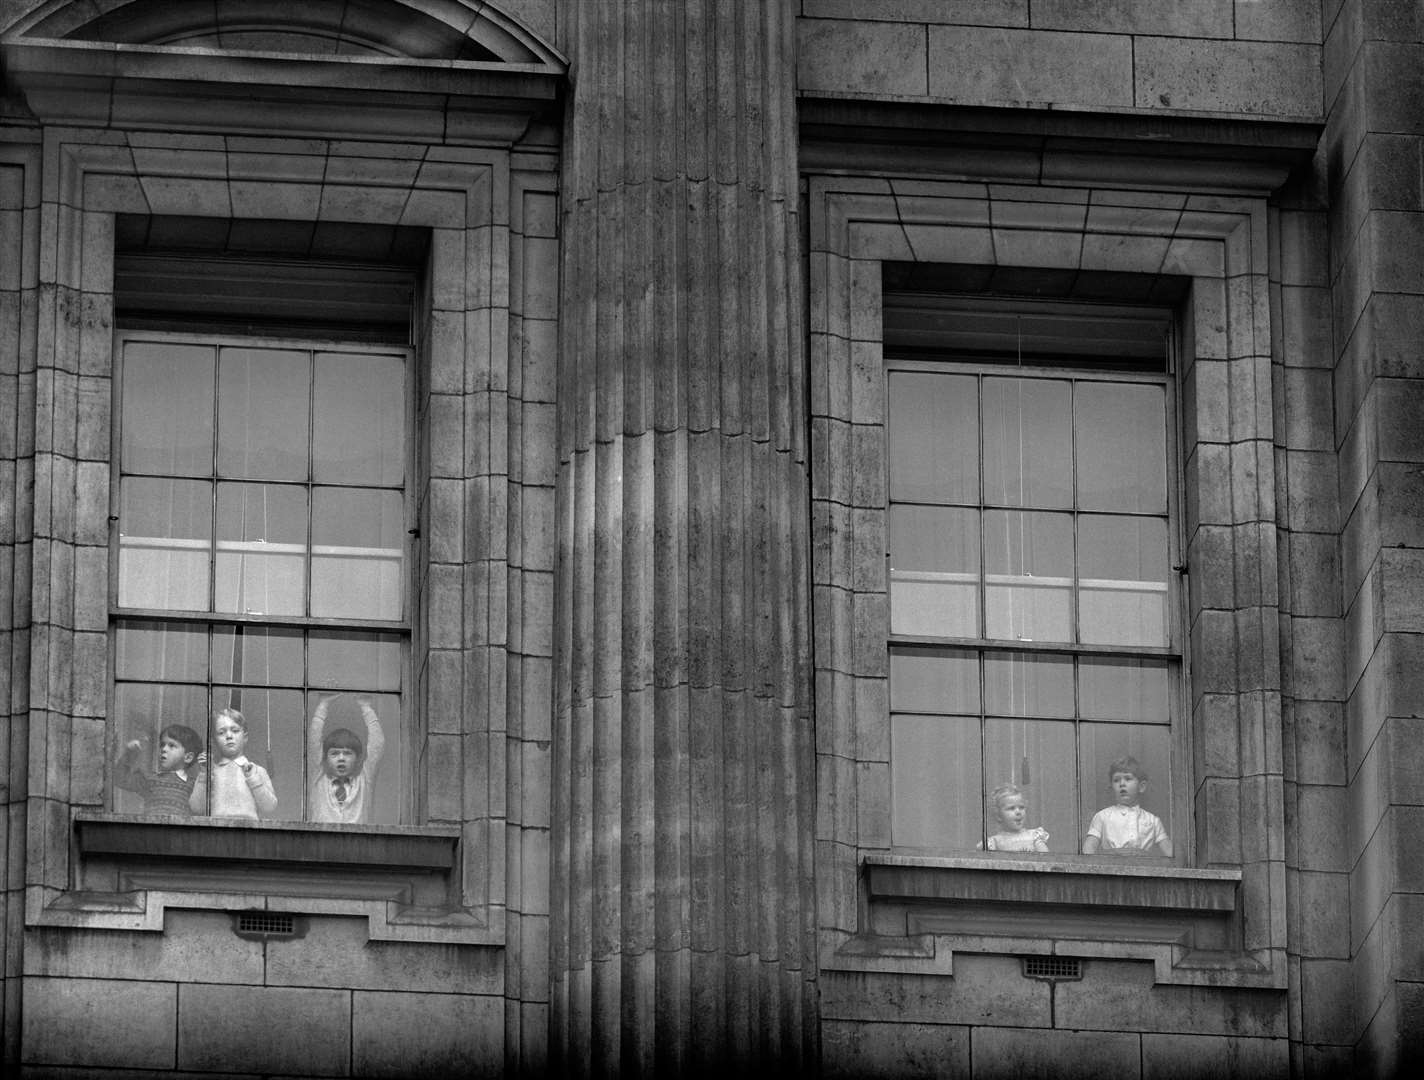 Prince Charles and Princess Anne share a window (far right) after the Queen’s first State Opening of Parliament in 1952 (PA)